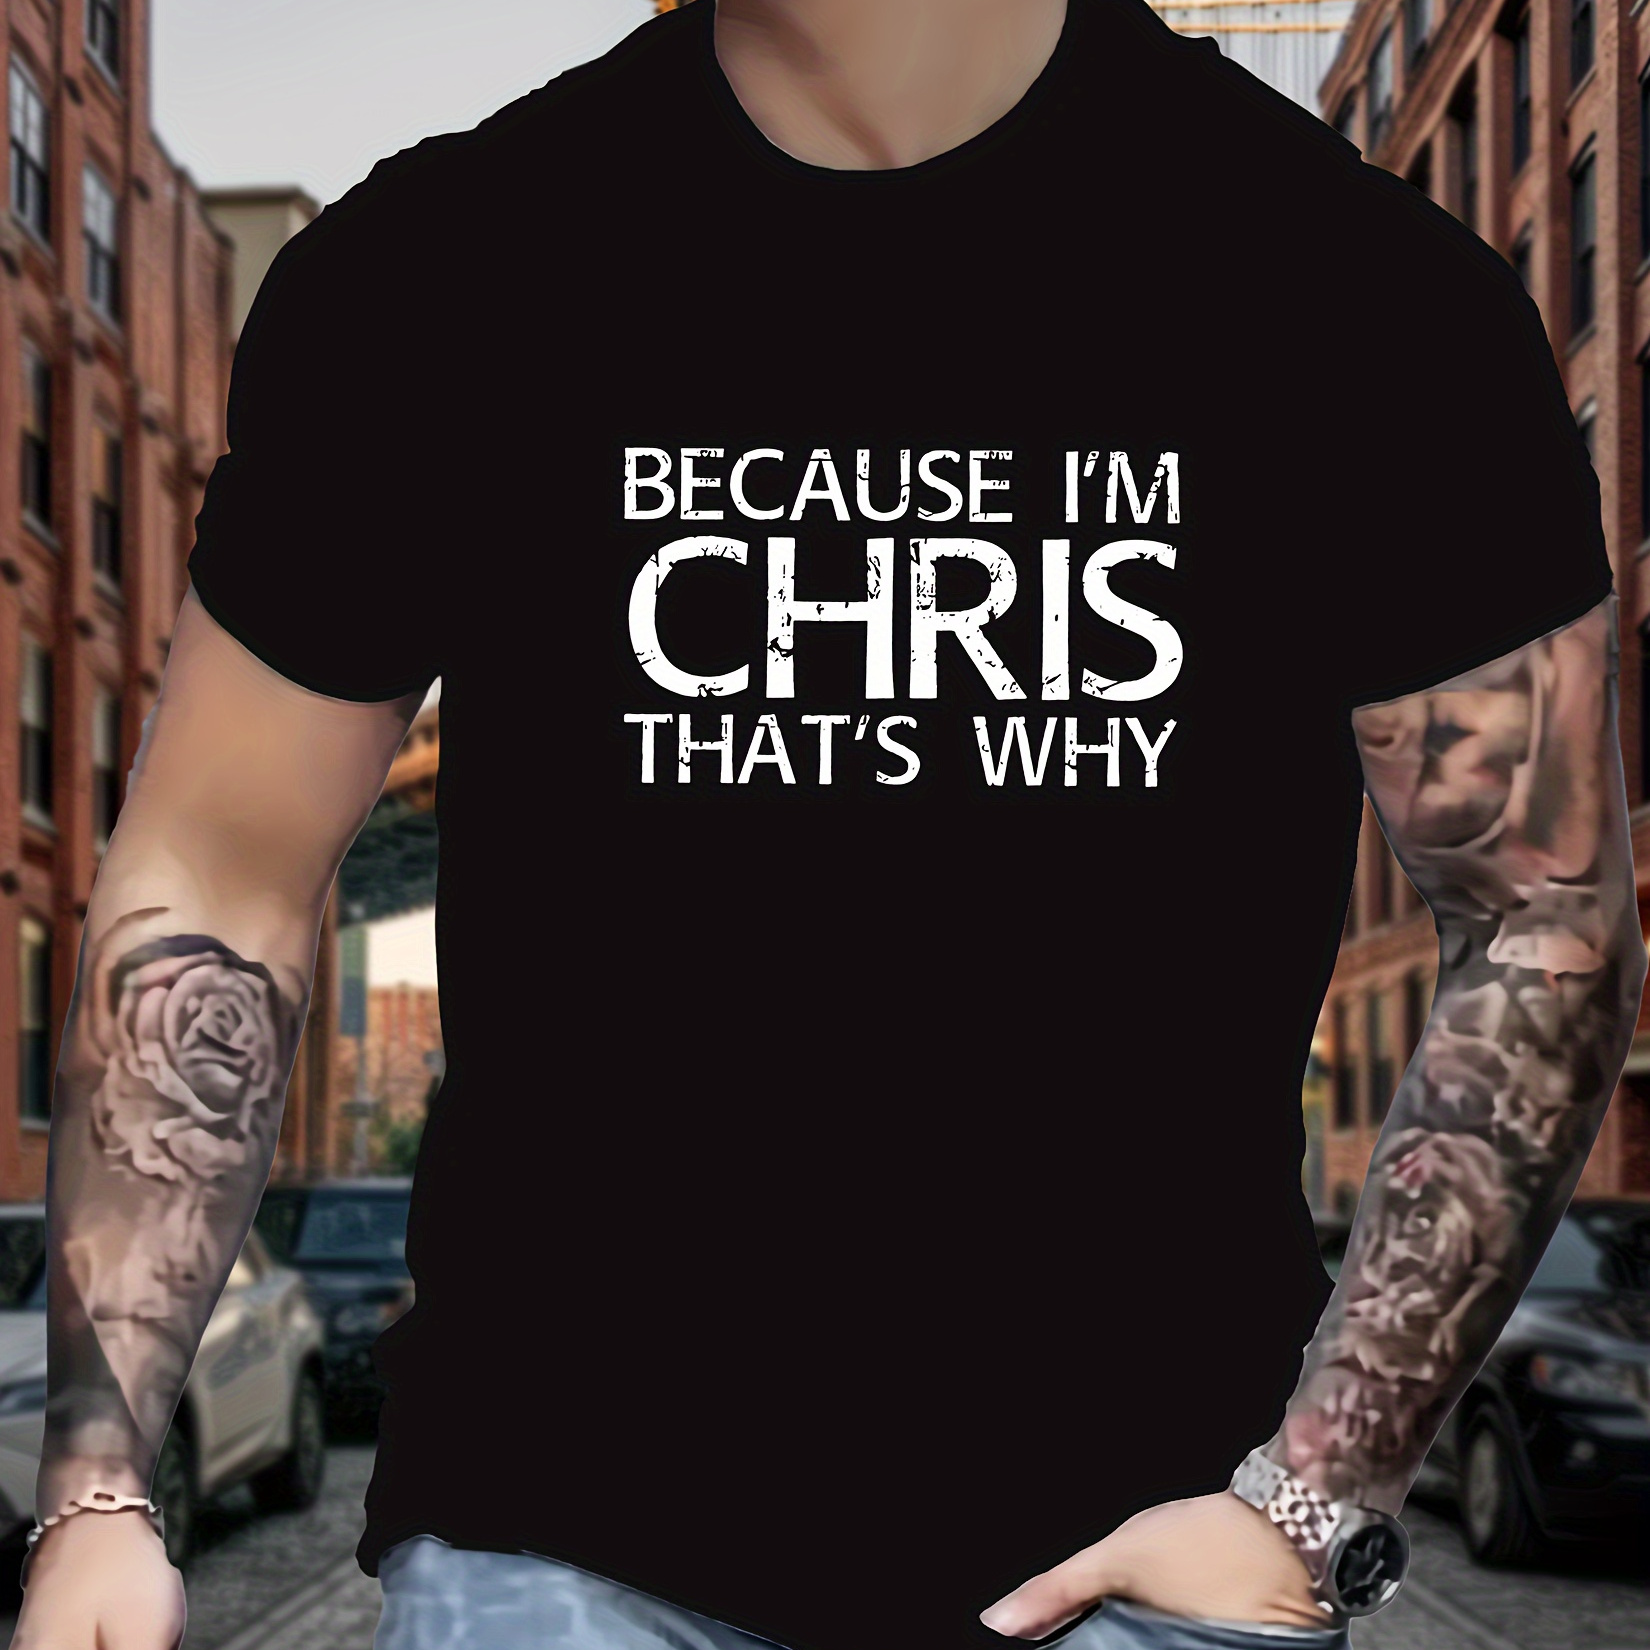 

Because I'm Chris That's Why Print Men's Crew Neck Short Sleeve T-shirt, Summer Casual Comfy Top For Outdoor Fitness & Daily Wear